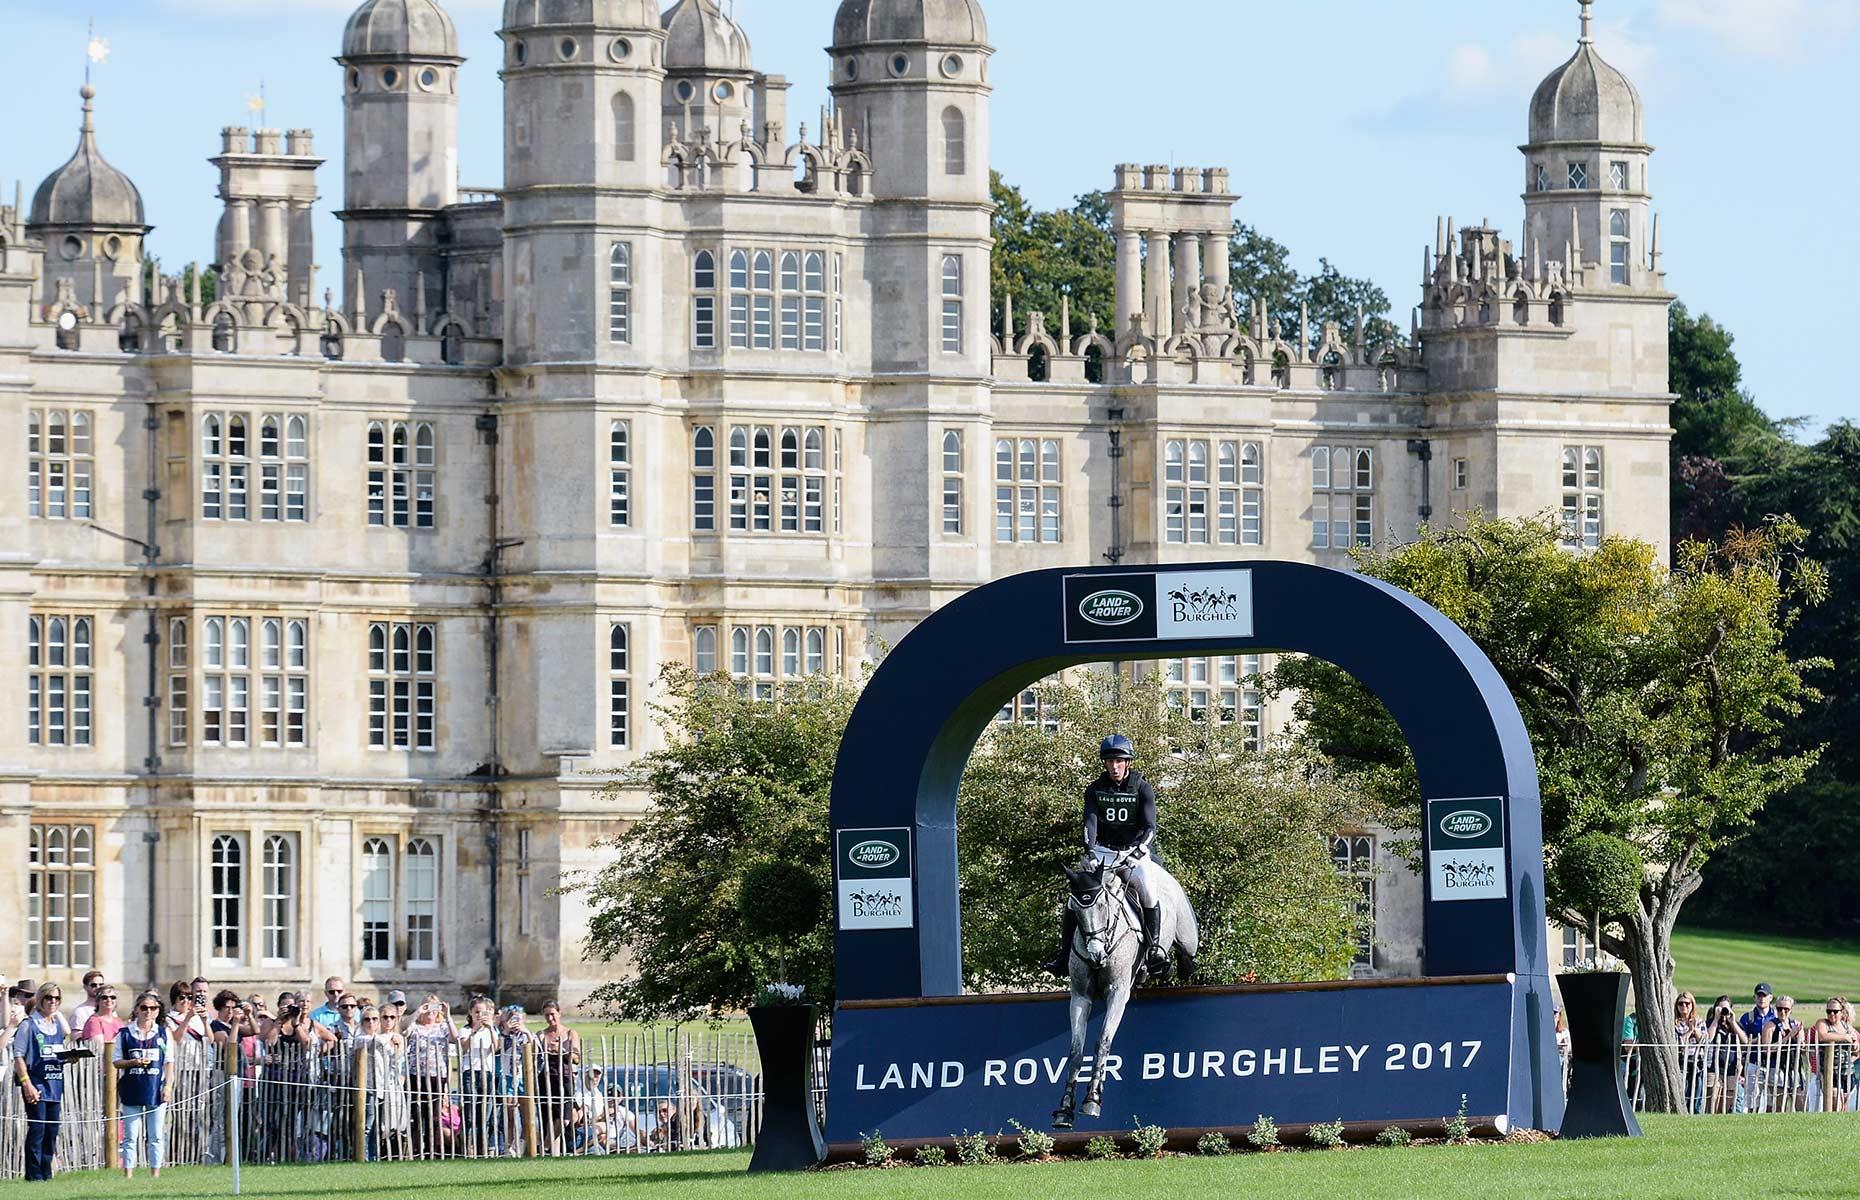 <p>Brownlow was not the only Marquess with a penchant for equestrian sport and a desire to see Burghley House remain in public favour. In 1956, the title and home were inherited by David Cecil, a distinguished athlete and Olympian whose accomplishments were immortalised in the film <em><a href="https://burghley.co.uk/about-us/the-family/history-of-the-family">Chariots of Fire</a></em>.</p>  <p>Cecil undertook a series of substantial modernisation and maintenance projects on the estate, including the introduction of electricity. As the proprietor of Burghley, he channelled his love of sport into horse riding, introducing the annual Burghley Horse Trials, which are still held today.</p>